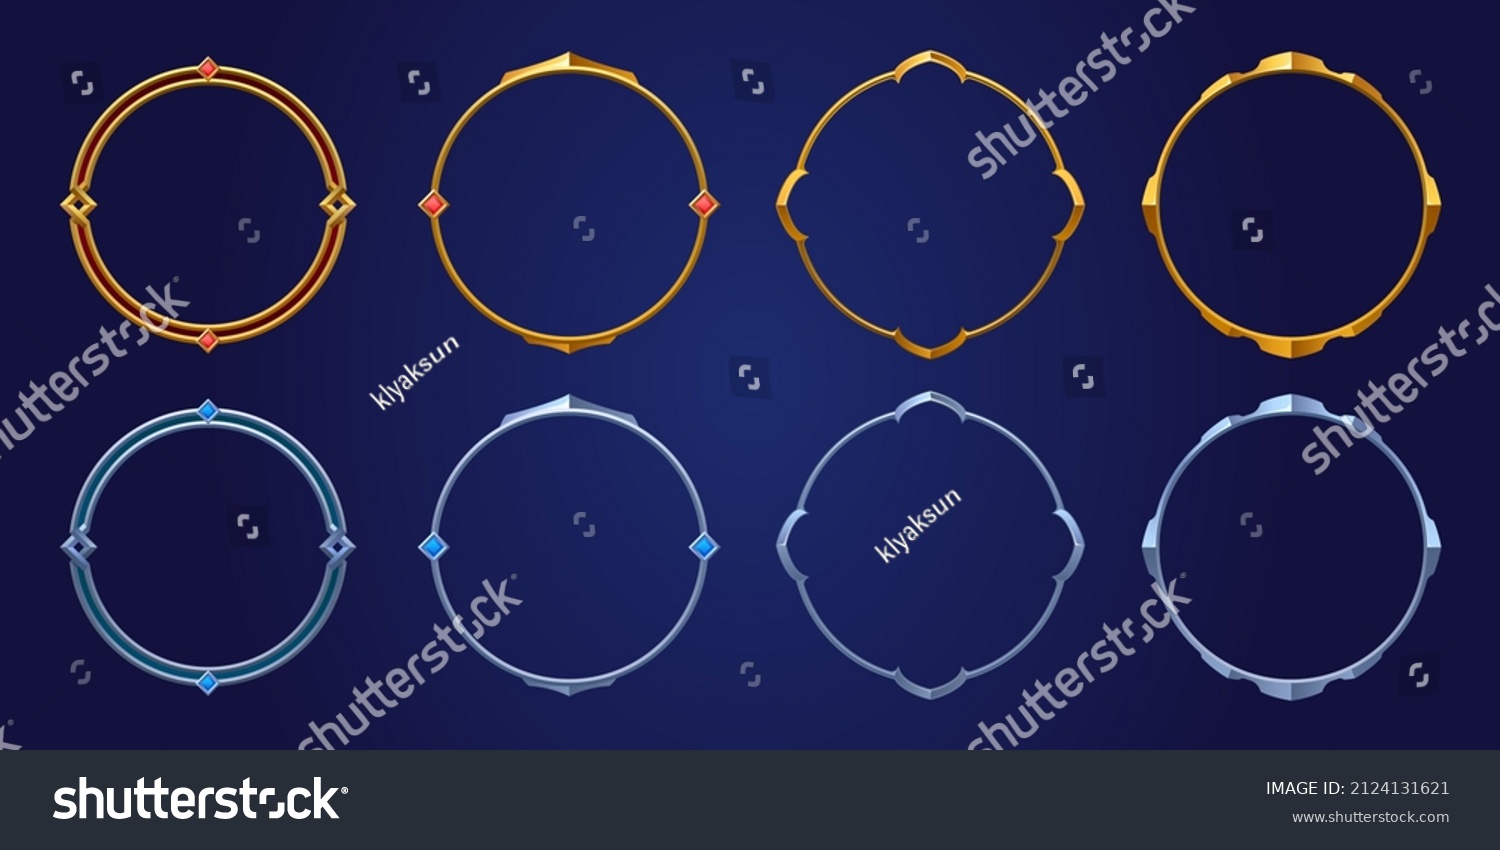 SVG of Empty circle silver and gold frames in medieval style for game ui design. Vector cartoon set of user interface elements with metal border with gems isolated on background svg